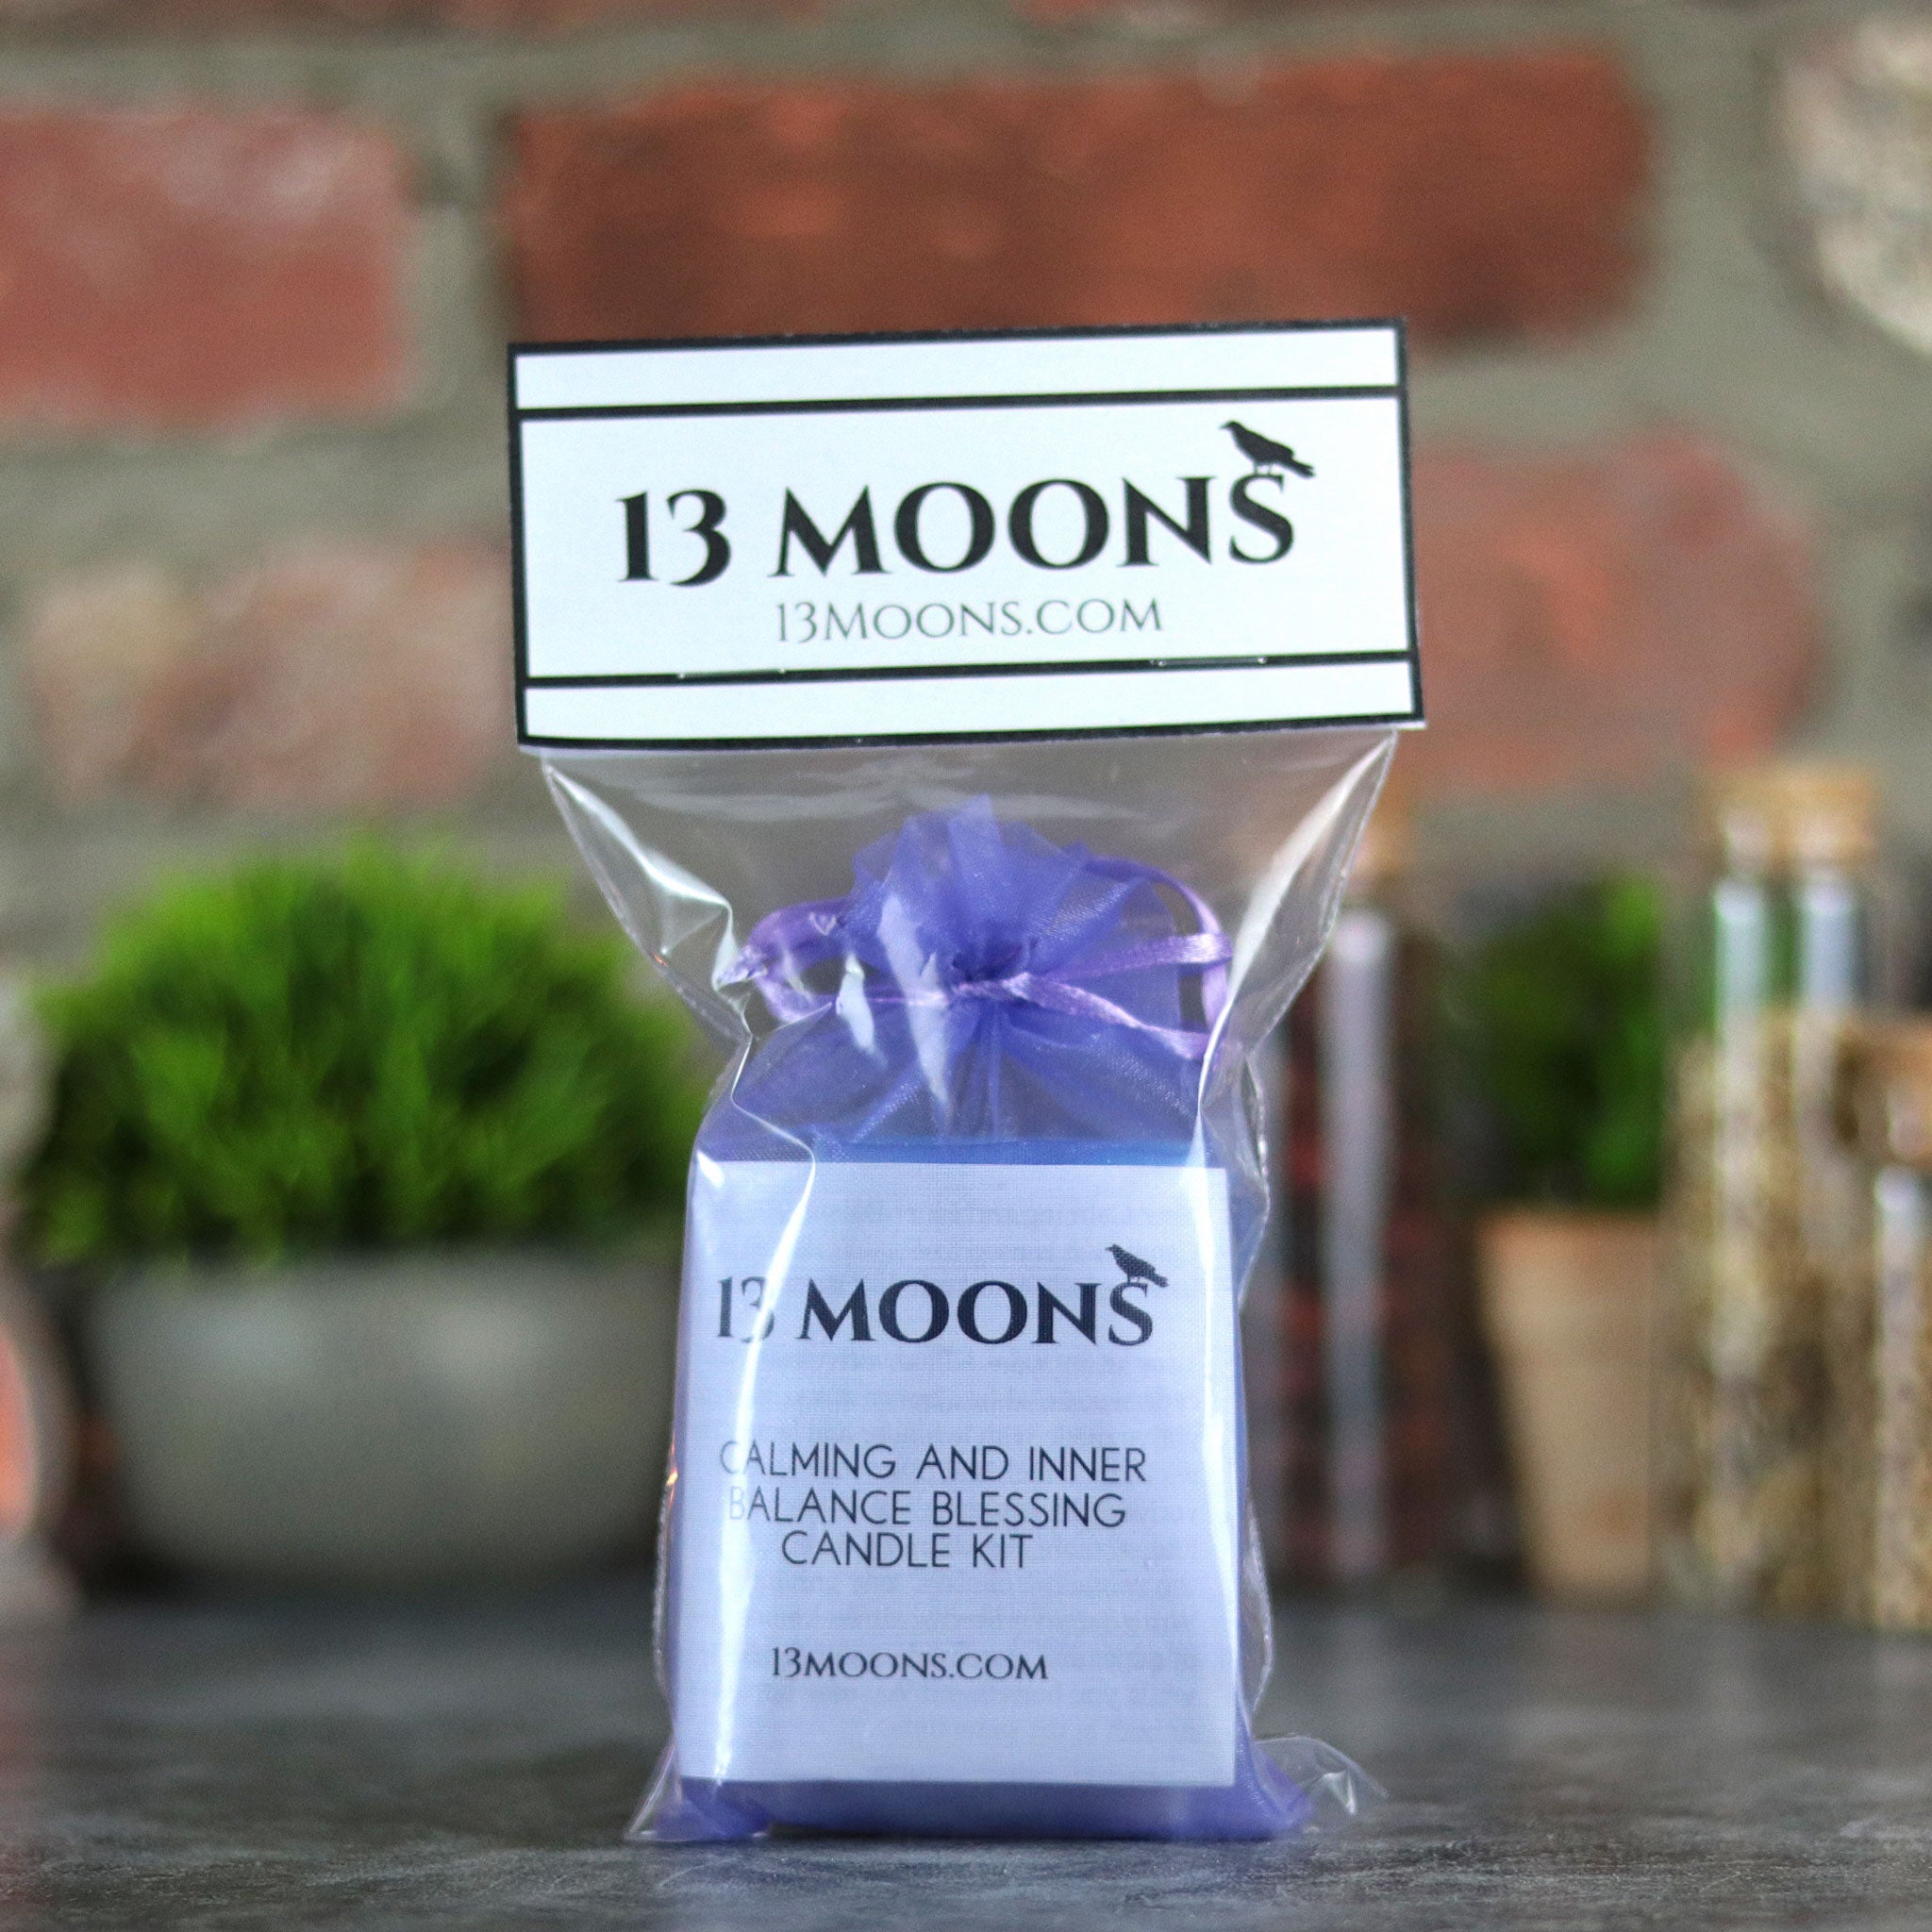 Calming and Inner Balance Blessing Candle Kit - 13 Moons